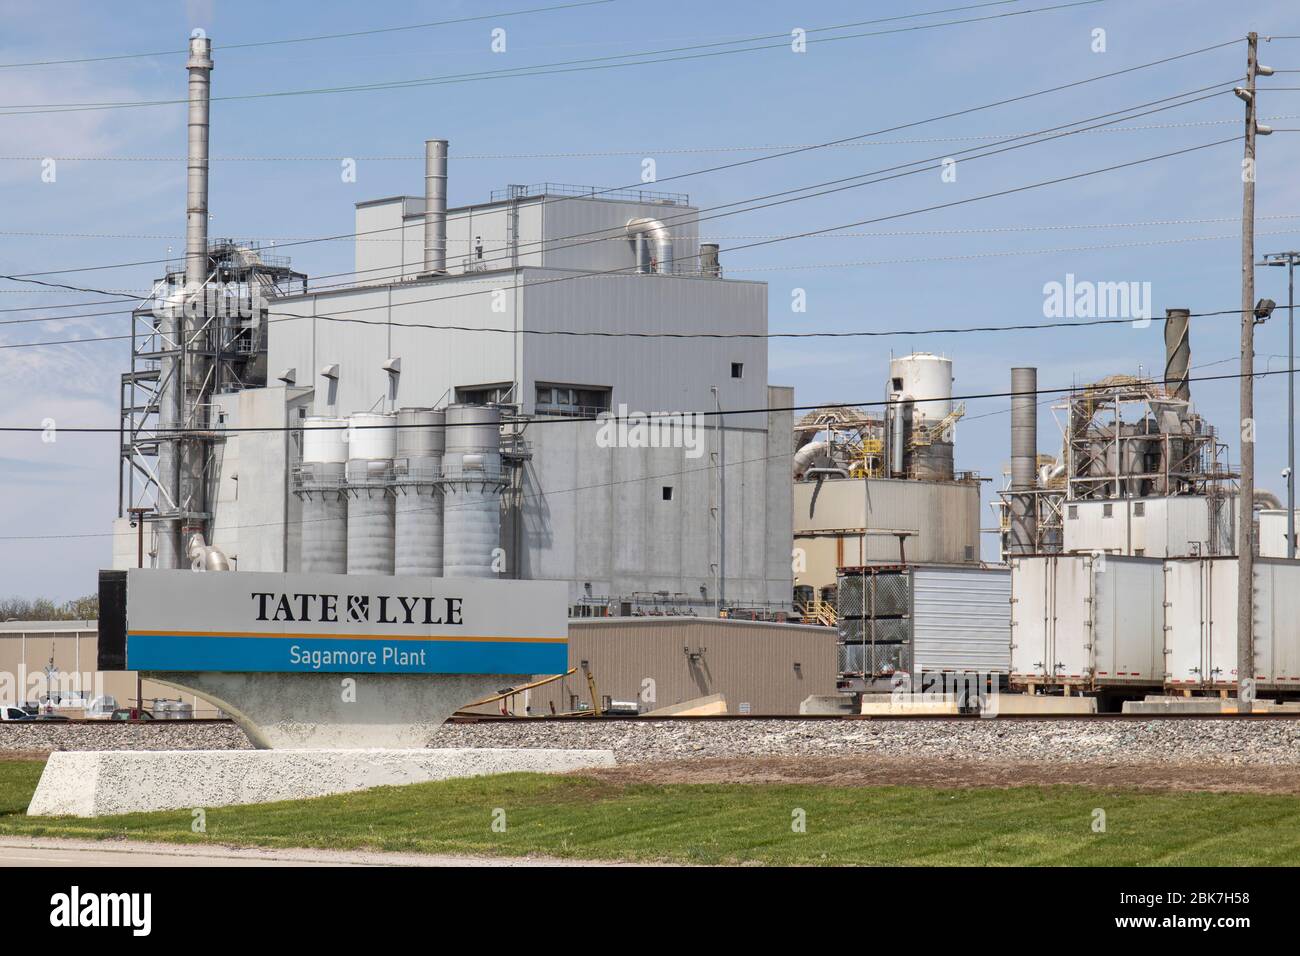 Lafayette - Circa May 2020: Tate & Lyle Sagamore Plant. Tate & Lyle produces and supplies innovative corn-based ingredients for food and beverage prod Stock Photo